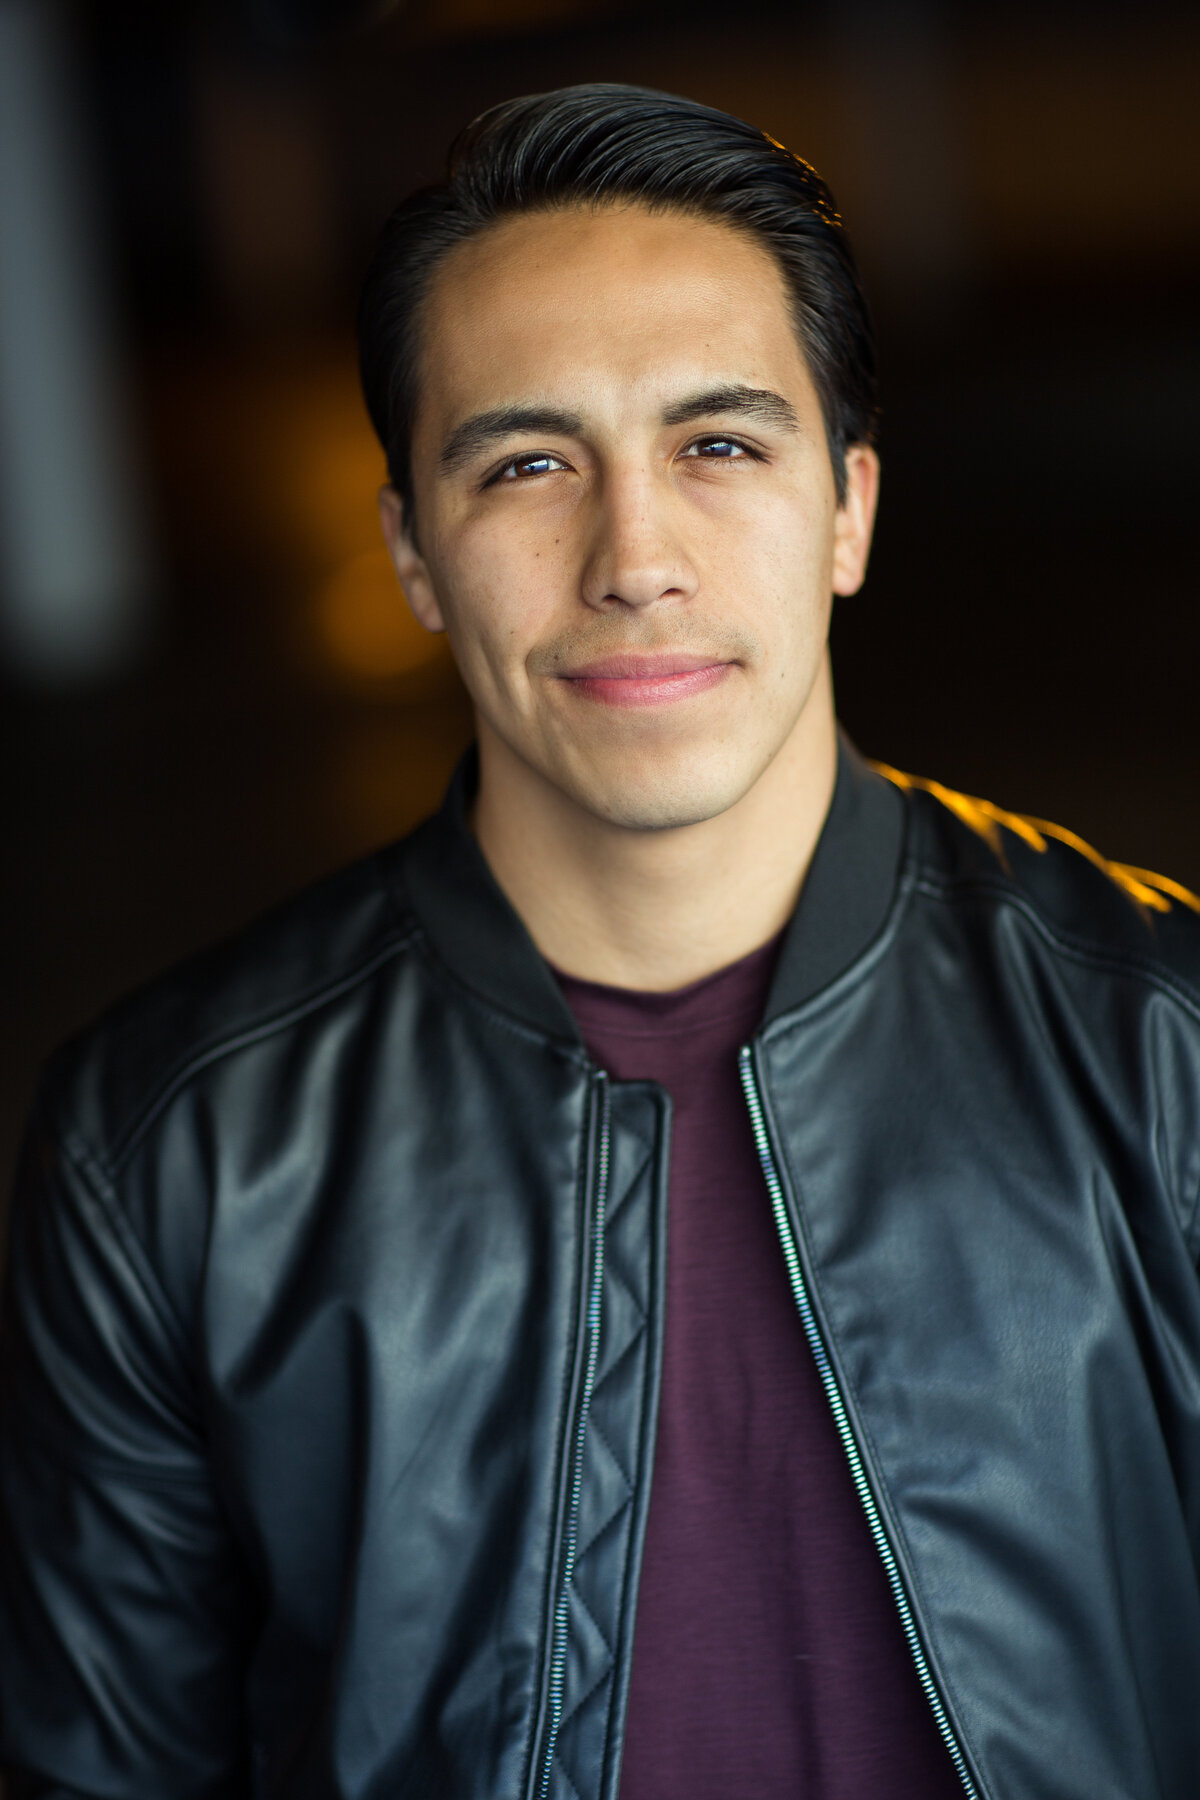 Headshot Photograph Of Young Man In Outer Black Leather Jacket And Inner Violet Shirt Los Angeles